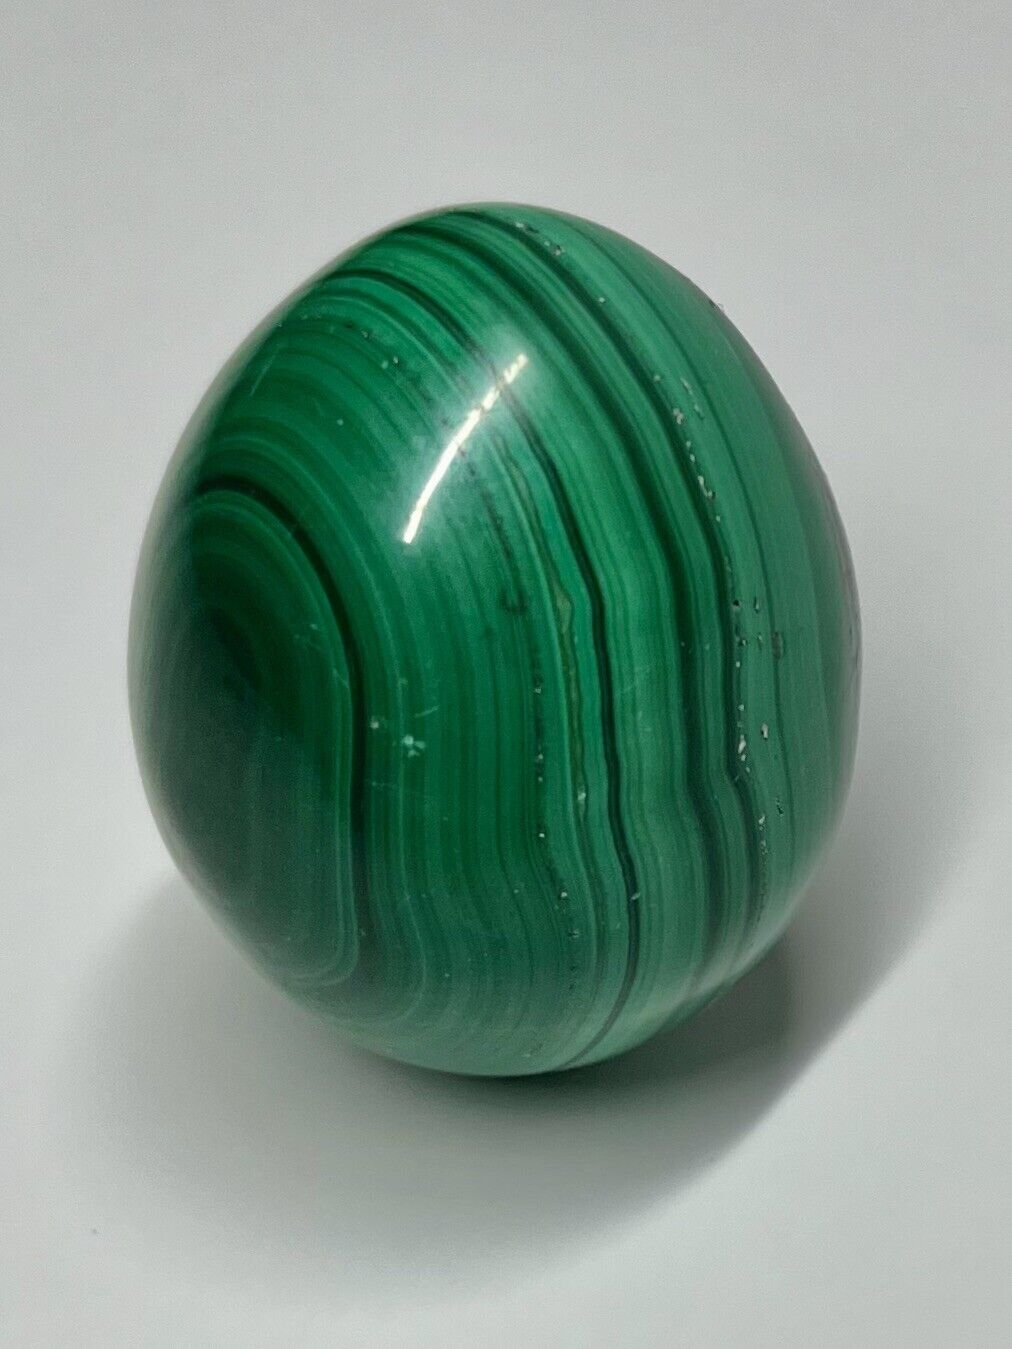 MALACHITE Beautiful Polished Green Egg 2 Inches Tall 65 Grams